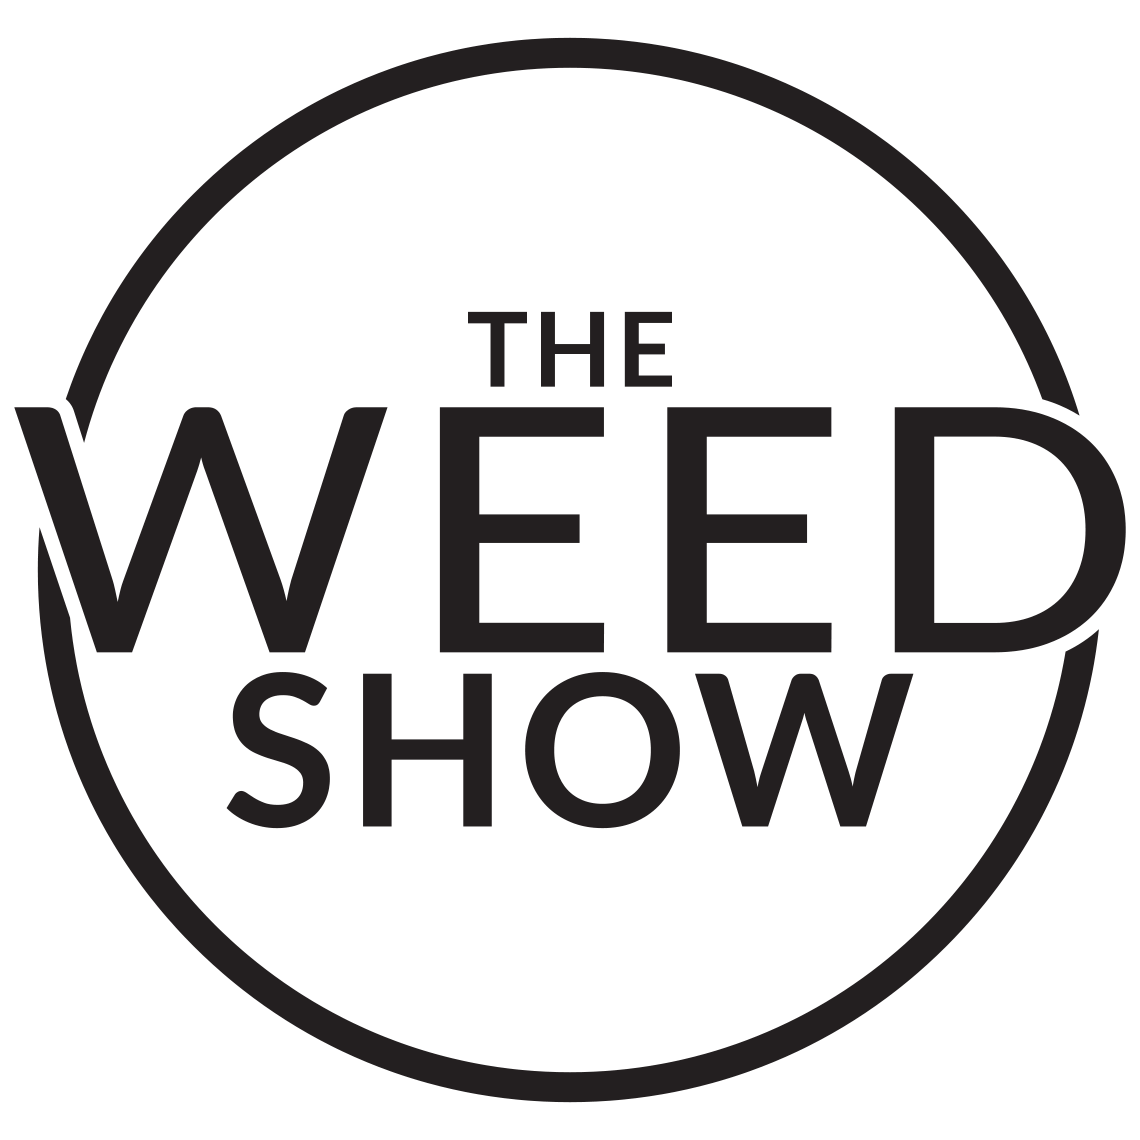 All Business Show Logo - The Weed Show Logo Neubert LLP. Cannabis Business Attorneys